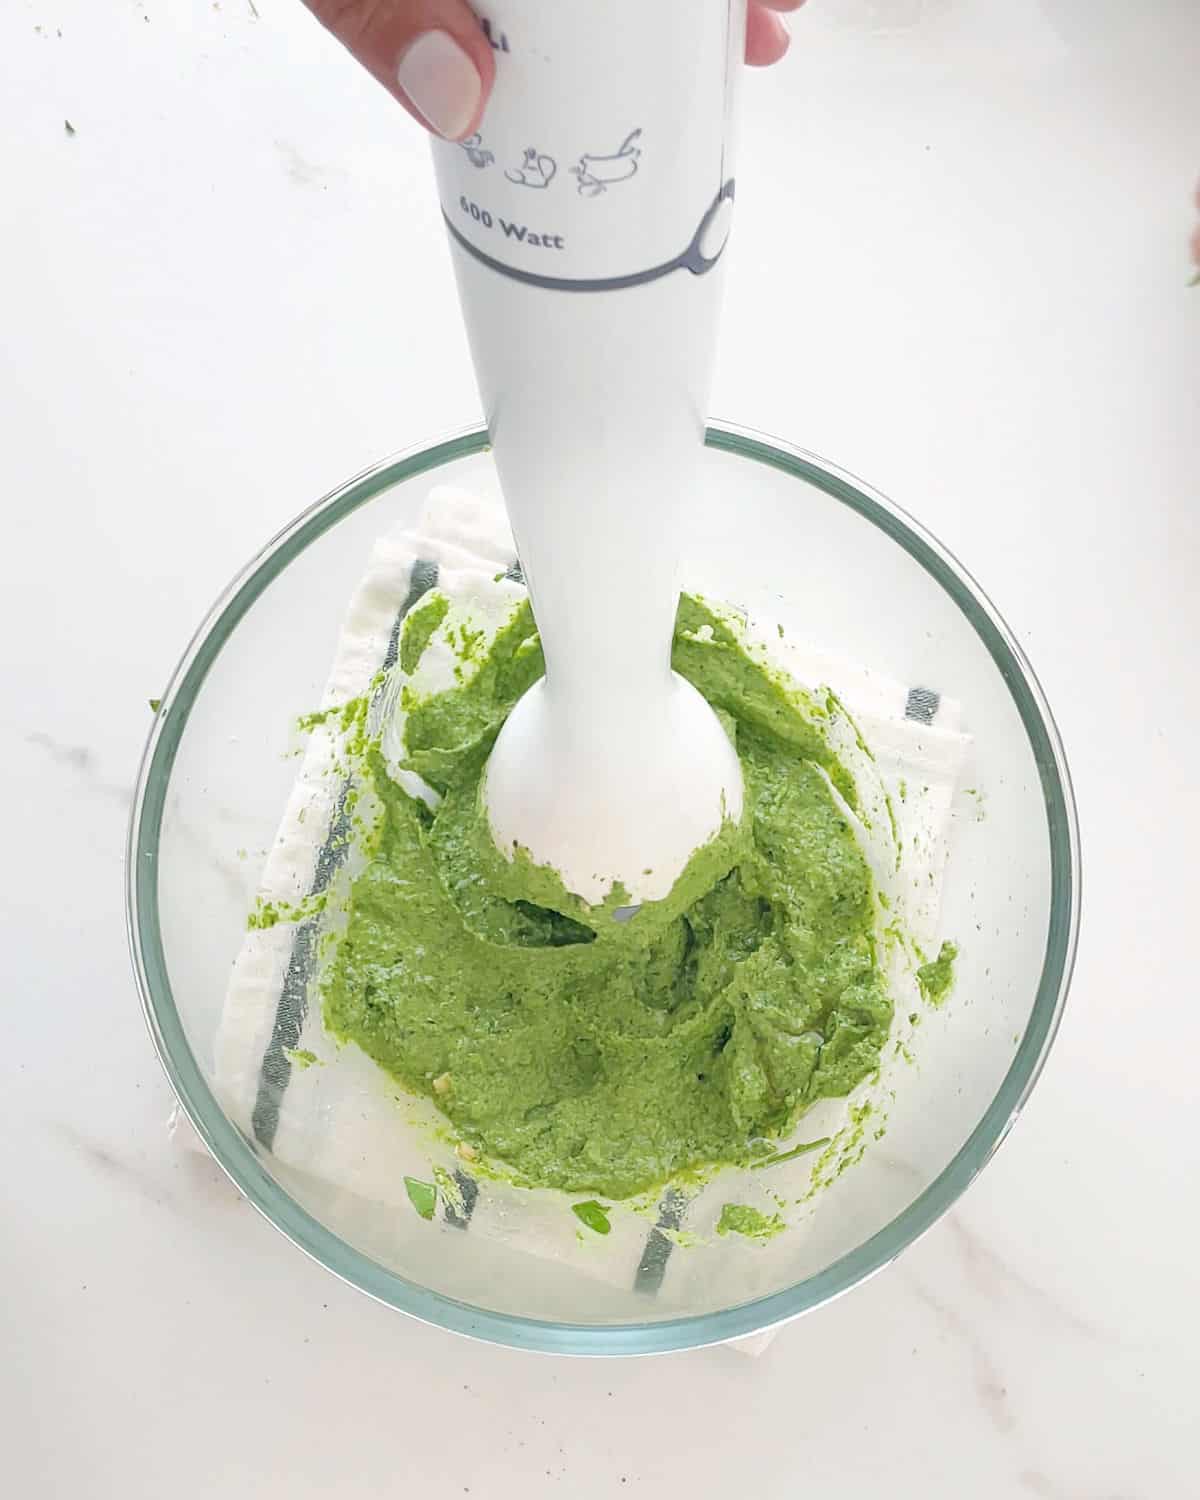 Mixing pesto with an immersion blender in a glass bowl on a white surface.